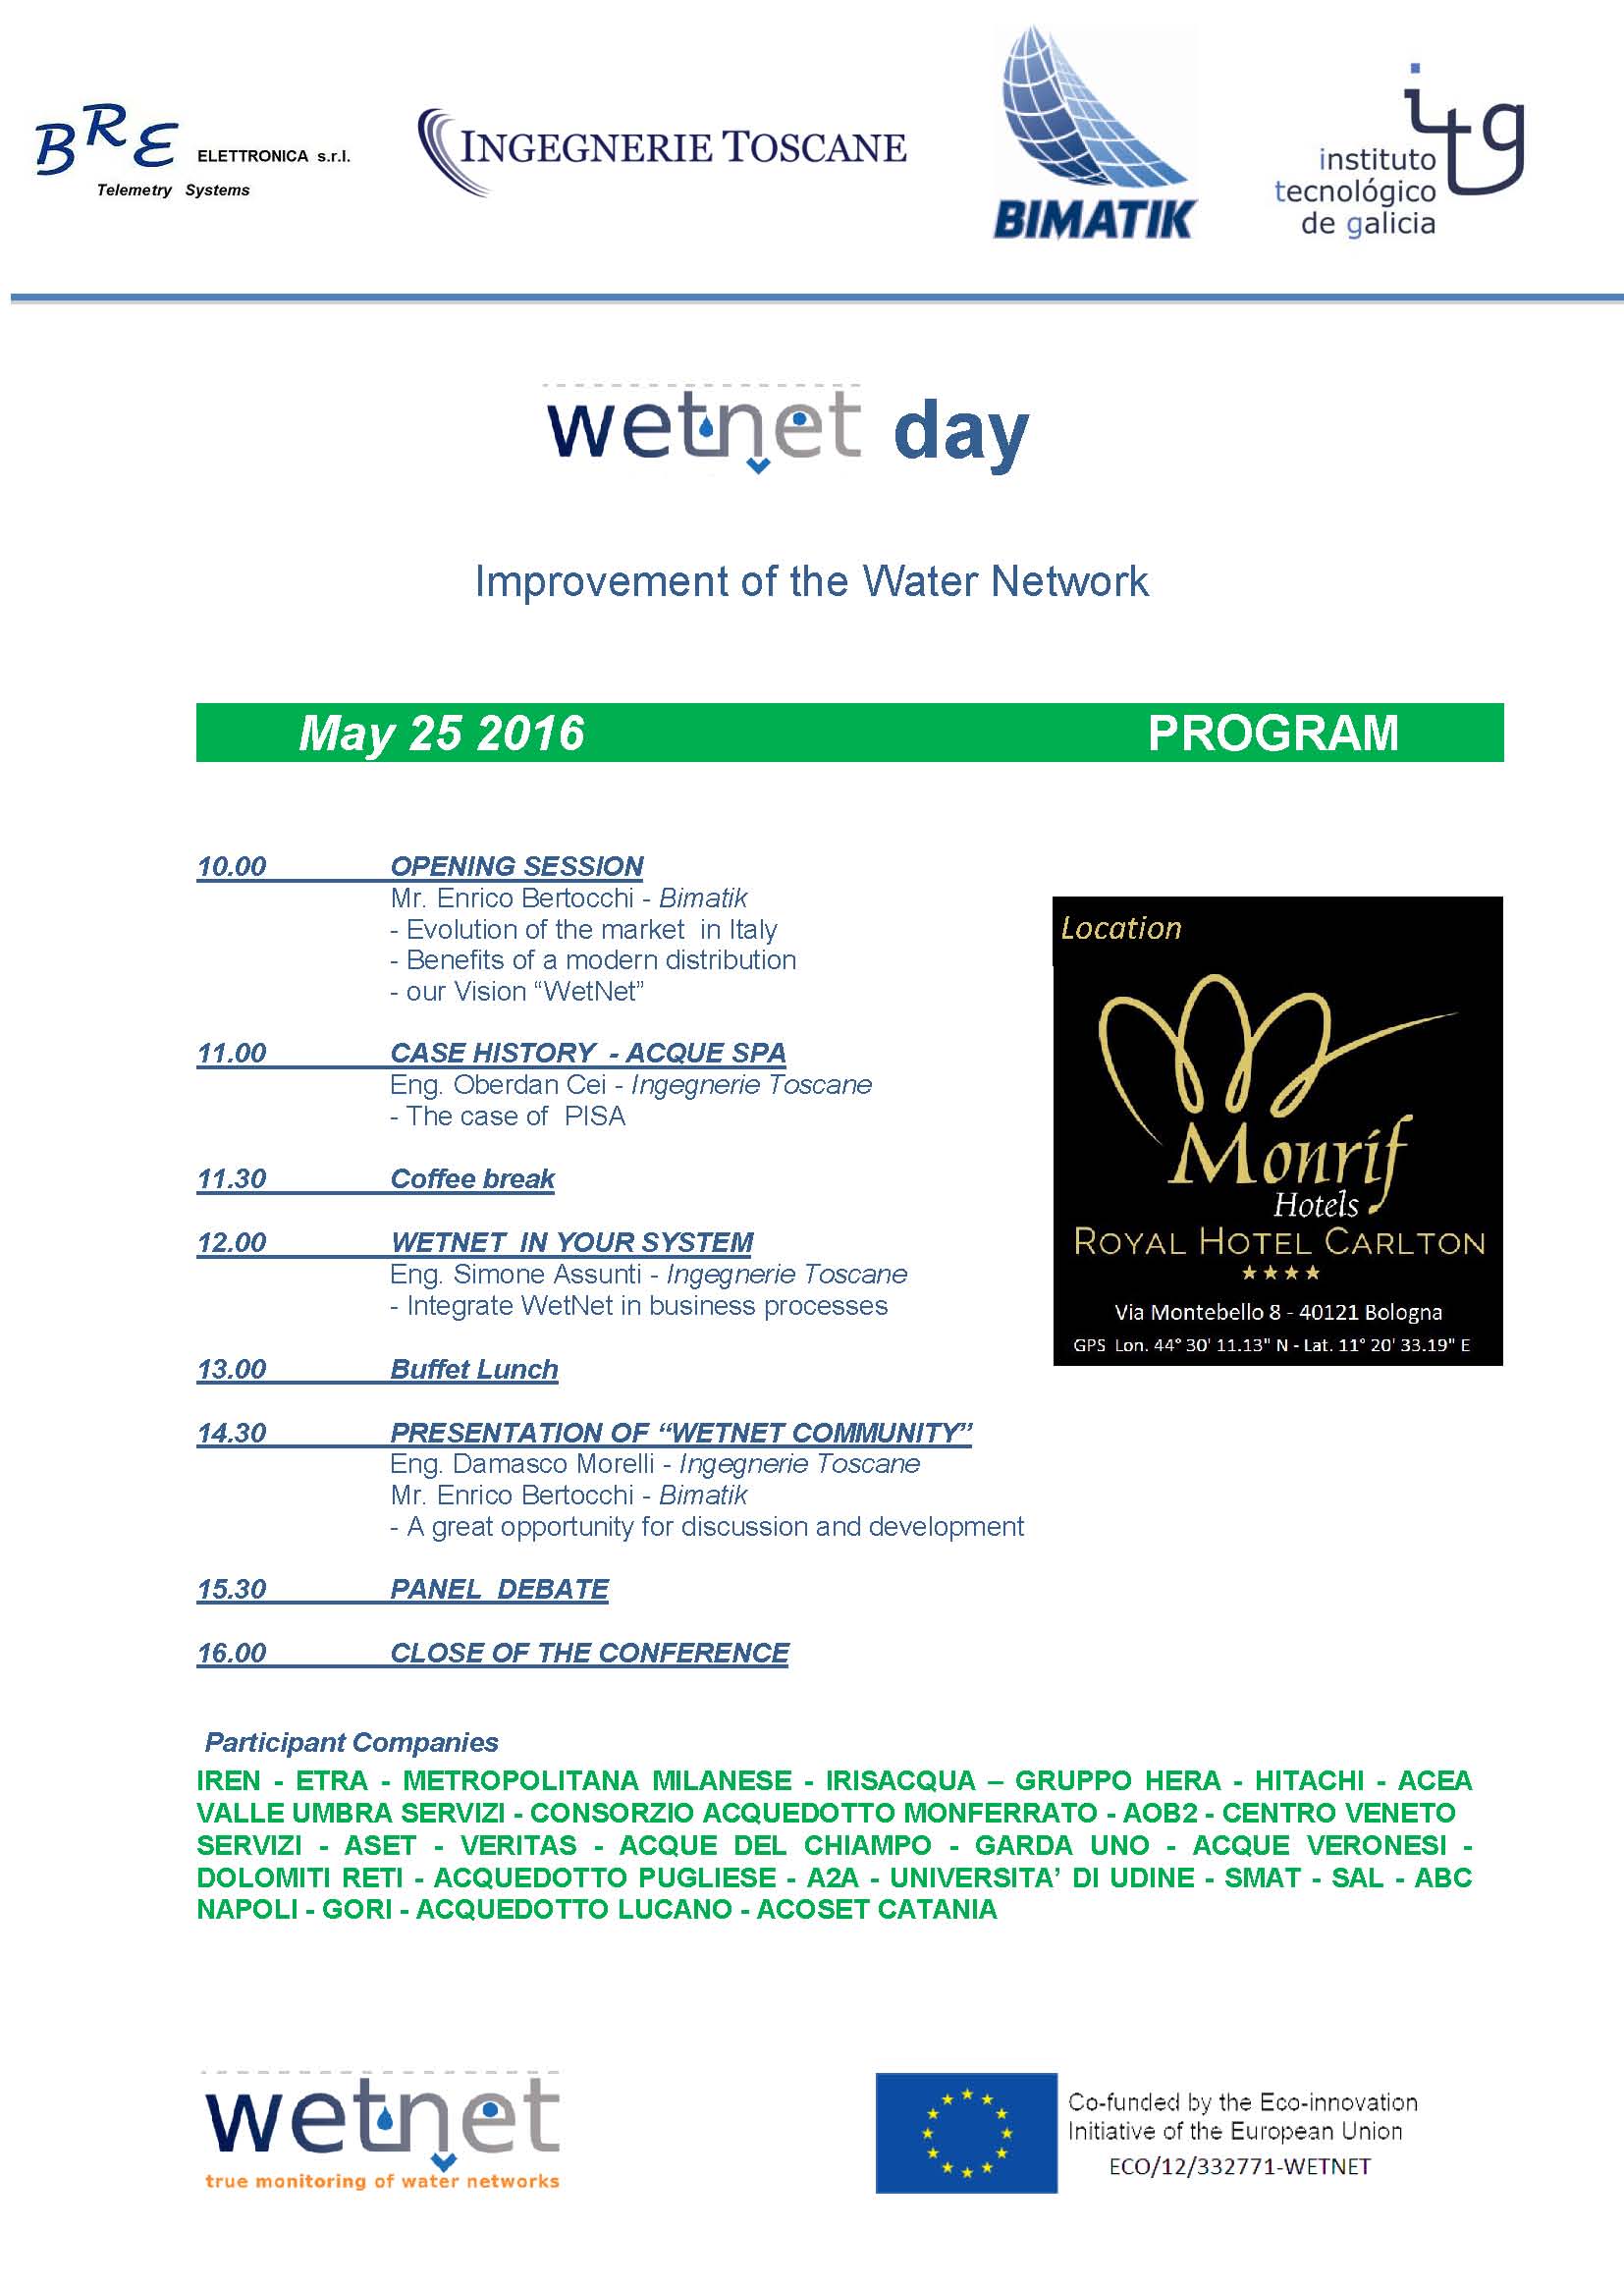 WETNET Conference in BOLOGNA (Italy) on May 25 FEW FREE INVITATIONS REMAINED, CONTACT ME IF INTERESTED IN. Evolution of the water market in Ital...